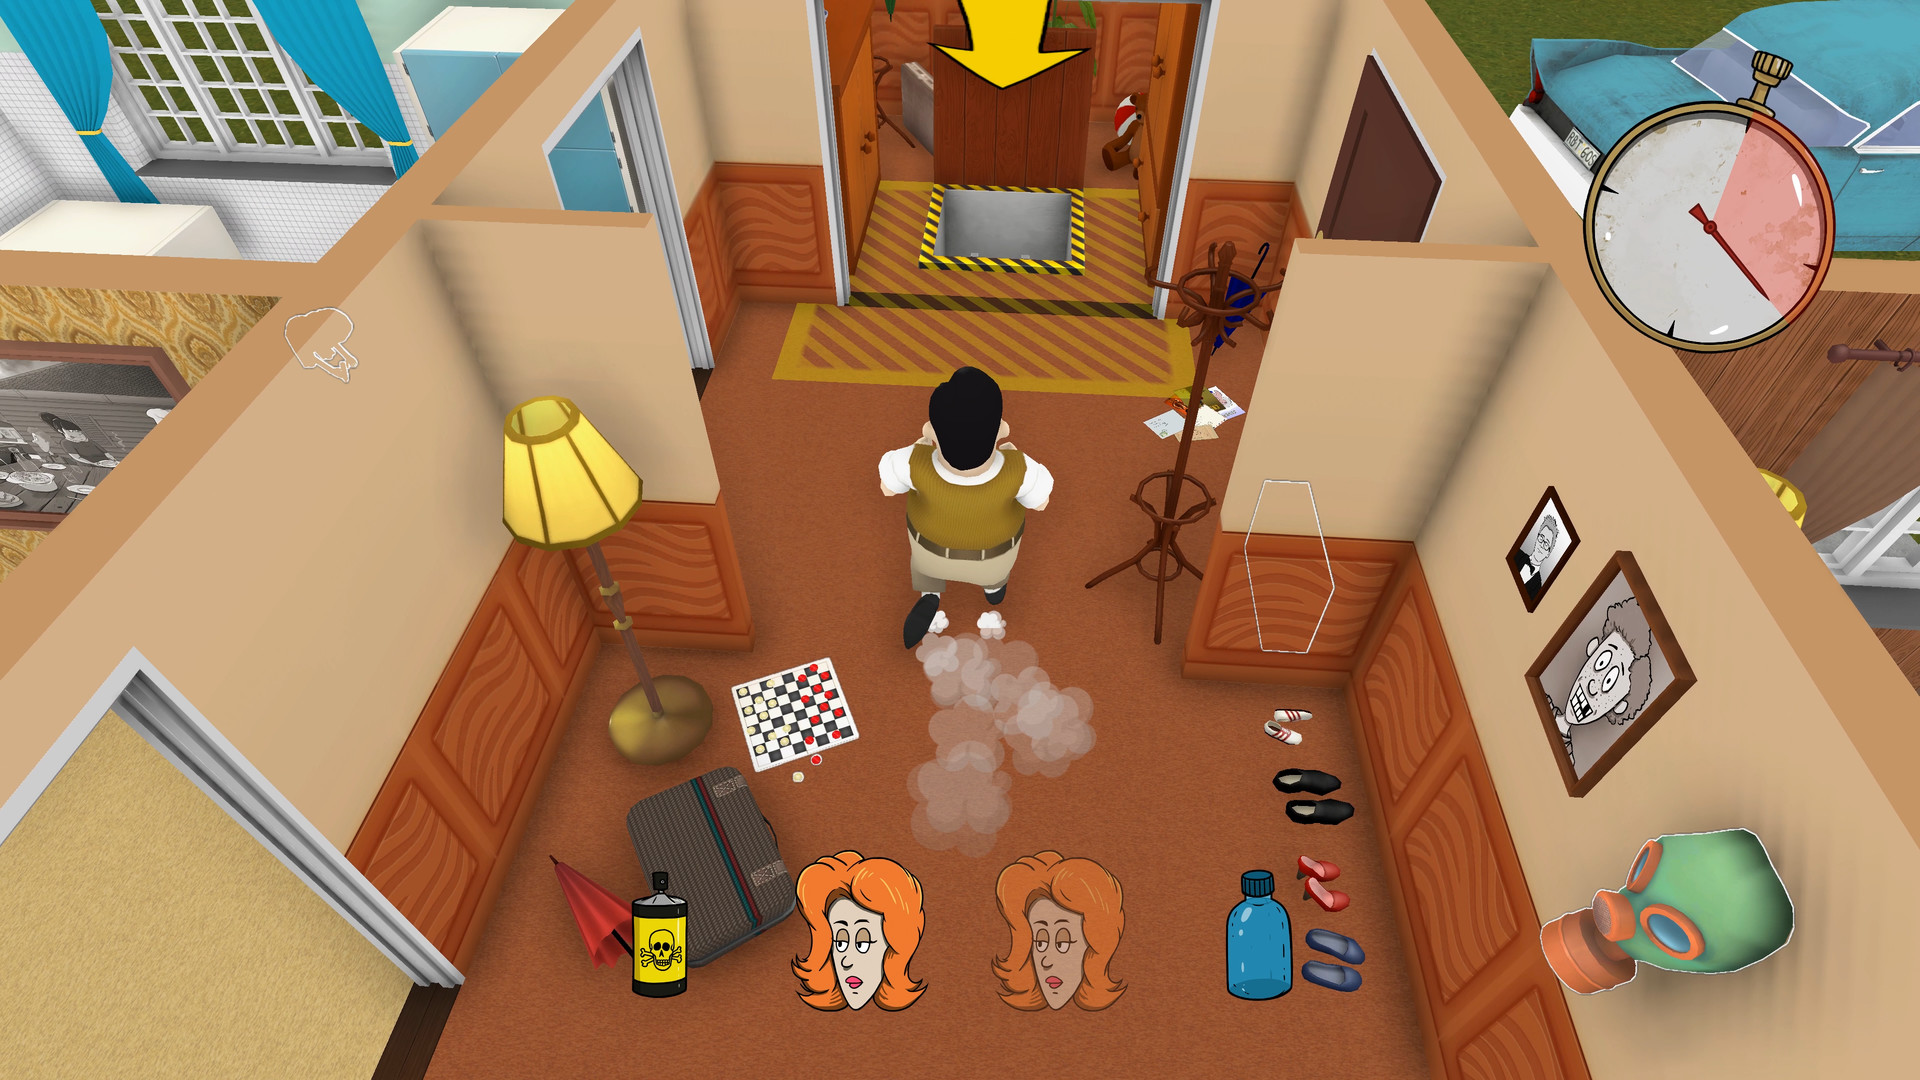 60 seconds survival game online free